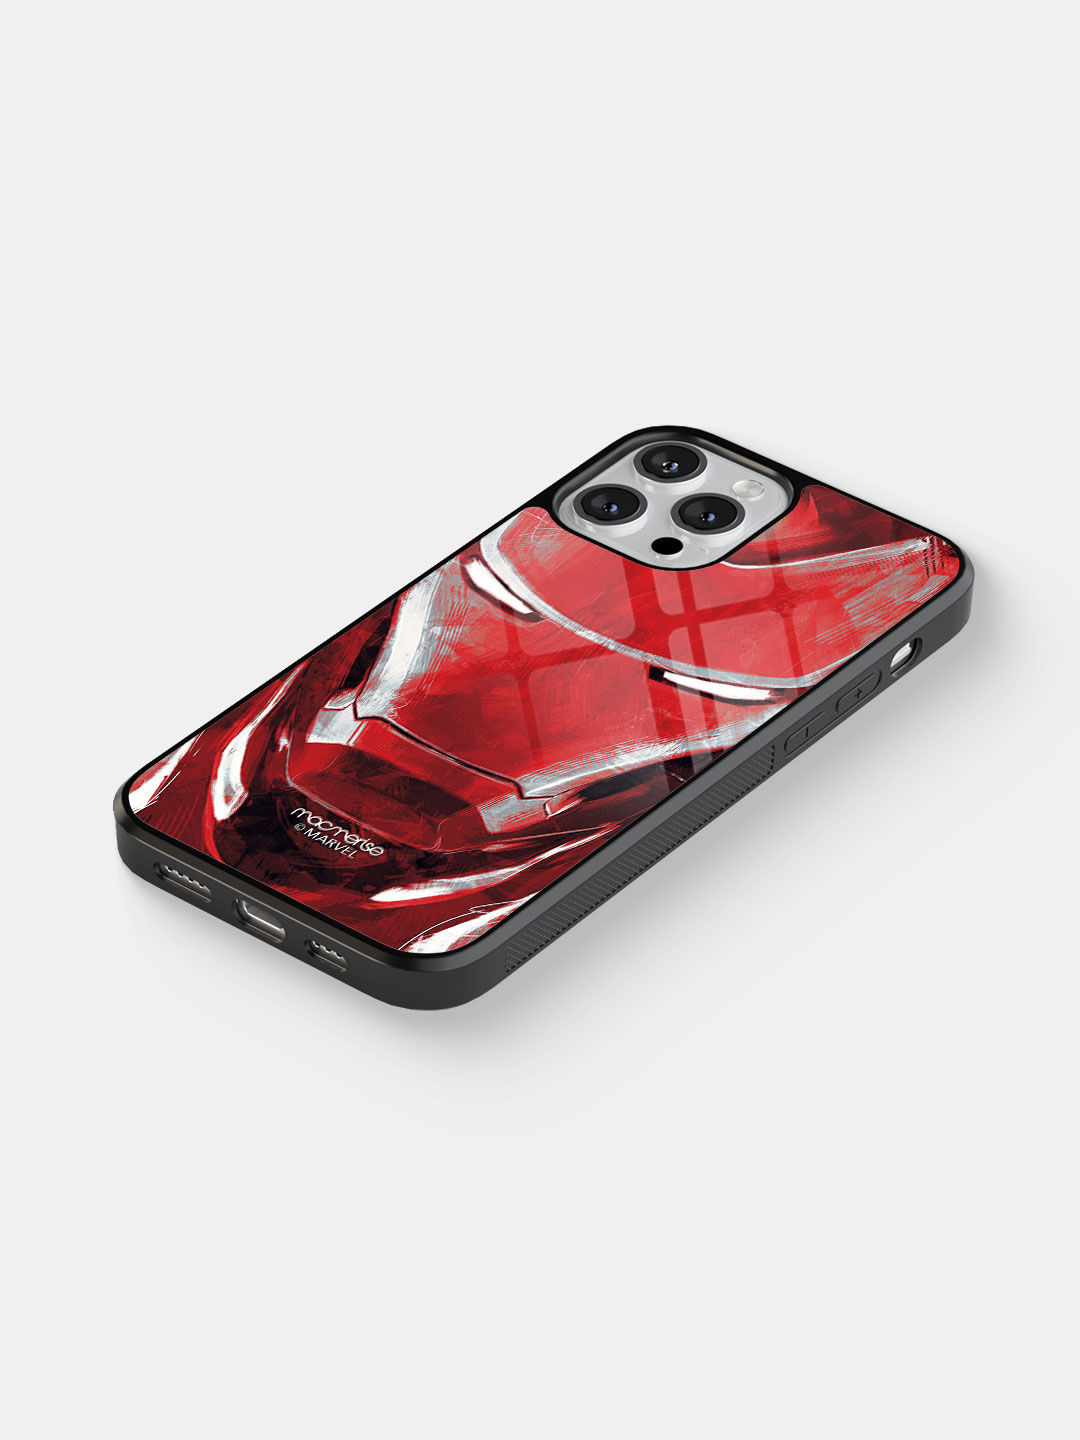 Charcoal Art Iron man - Glass Case For iPhone 13 Pro Max